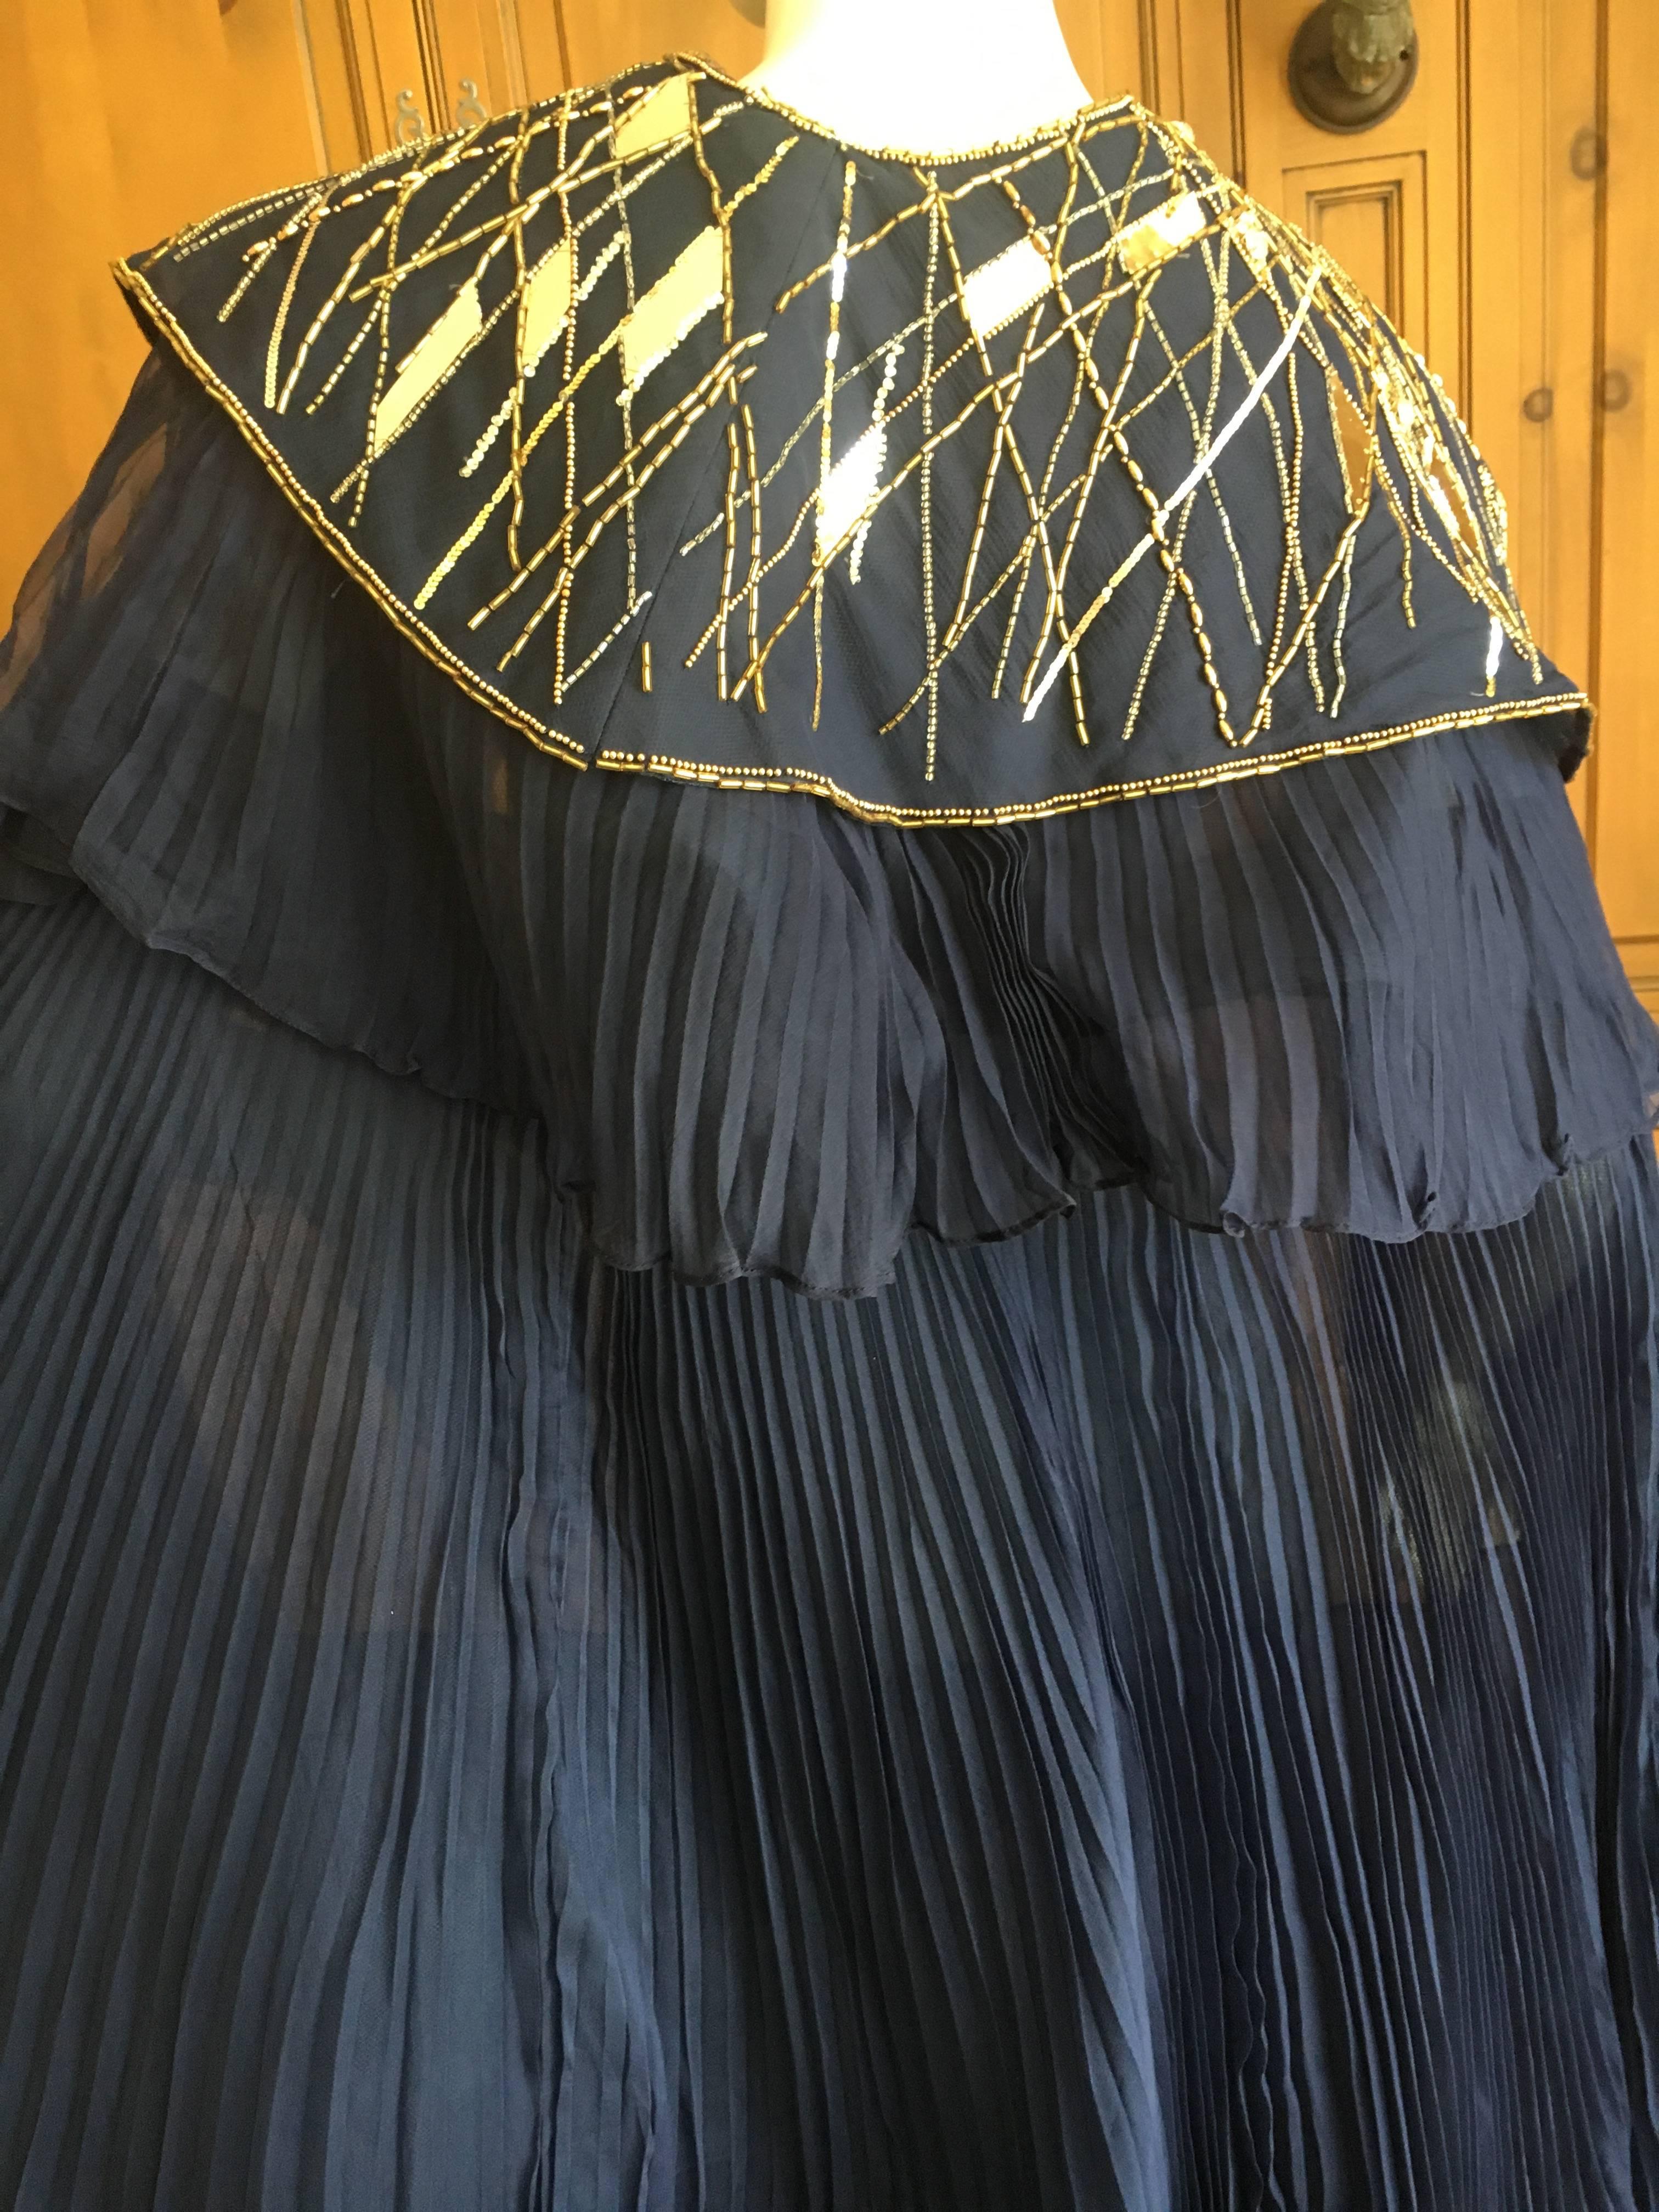 Bernard Perris Paris Dramatic Navy Blue Pleated Cape.
Wonderful navy blue sculptural cape with sequin details from Bernard Perris, Paris.
Multiple tulle layers add volume to this great vintage piece.
 The front large sequin is damaged